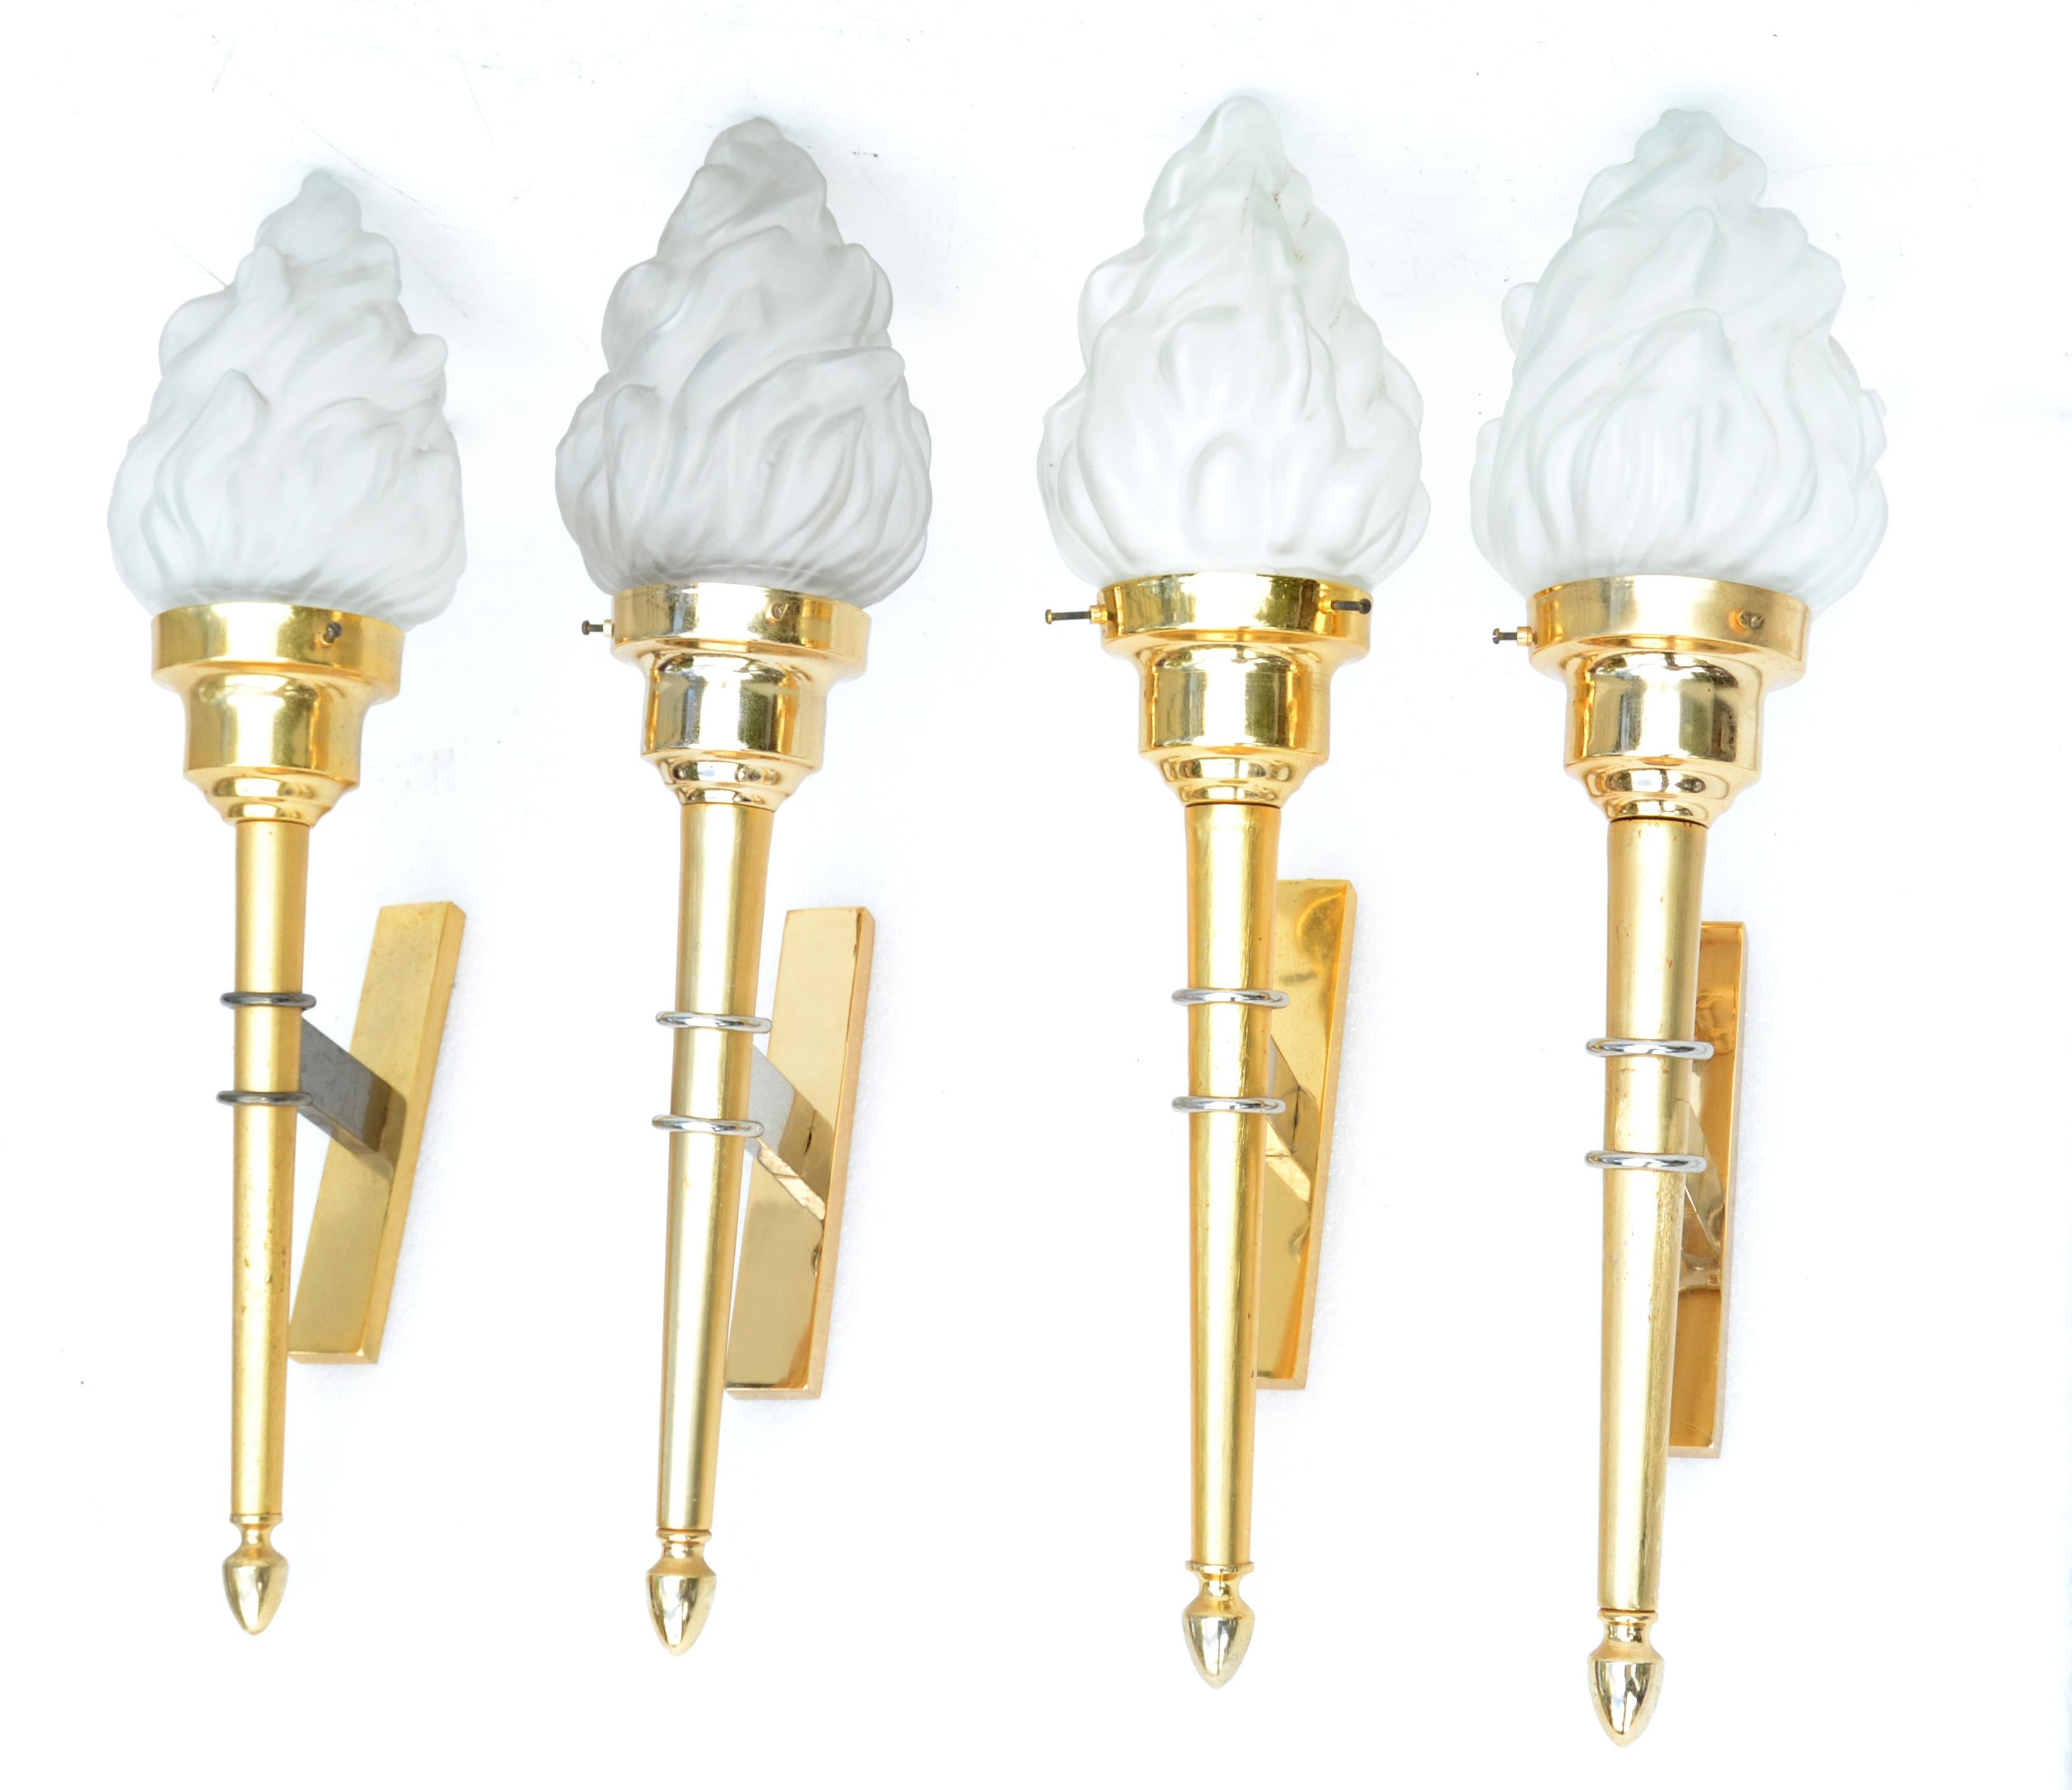 Polished Maison Jansen Style Sconces Brass & Blown Glass Flame Shade France 1950, Pair For Sale